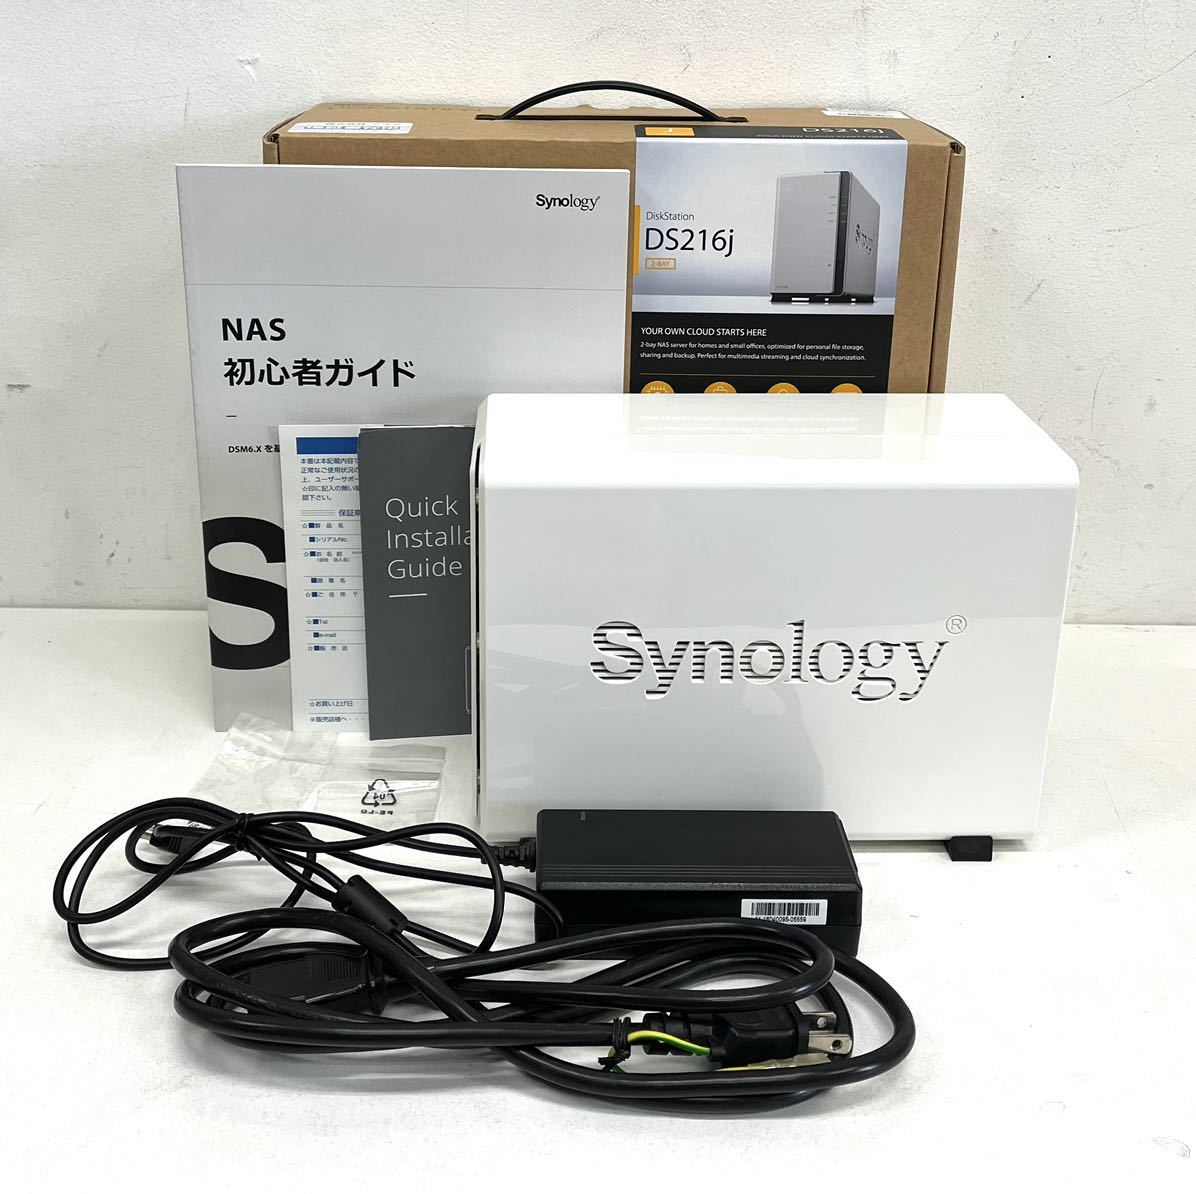 Synology DISKSTATION DS216j NAS HDD | JChere雅虎拍卖代购